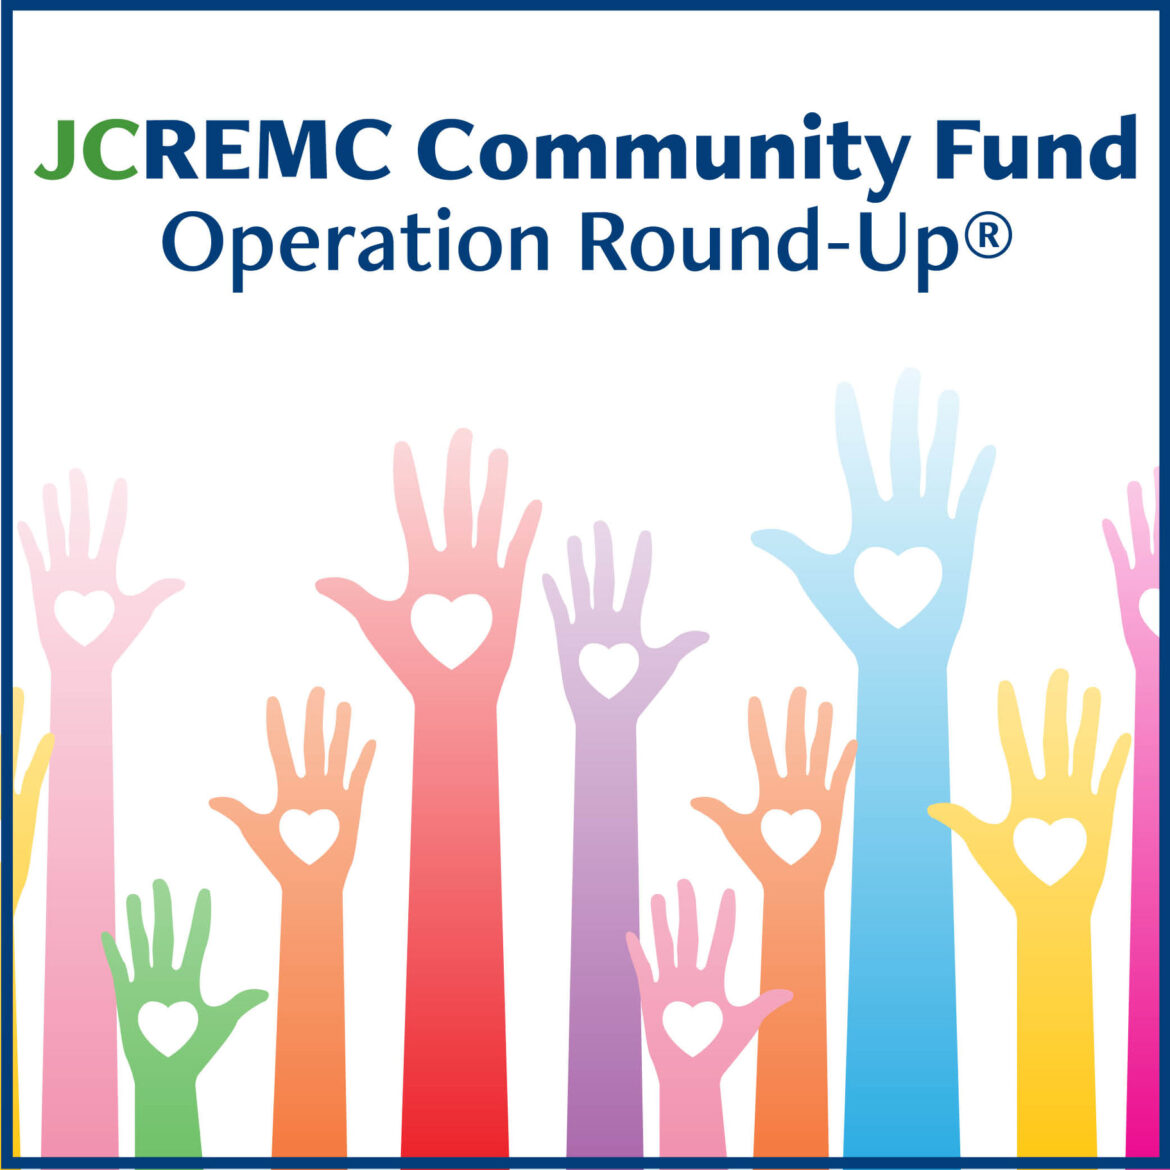 JCREMC Community Fund awards Operation Round-Up® grants, food relief funds